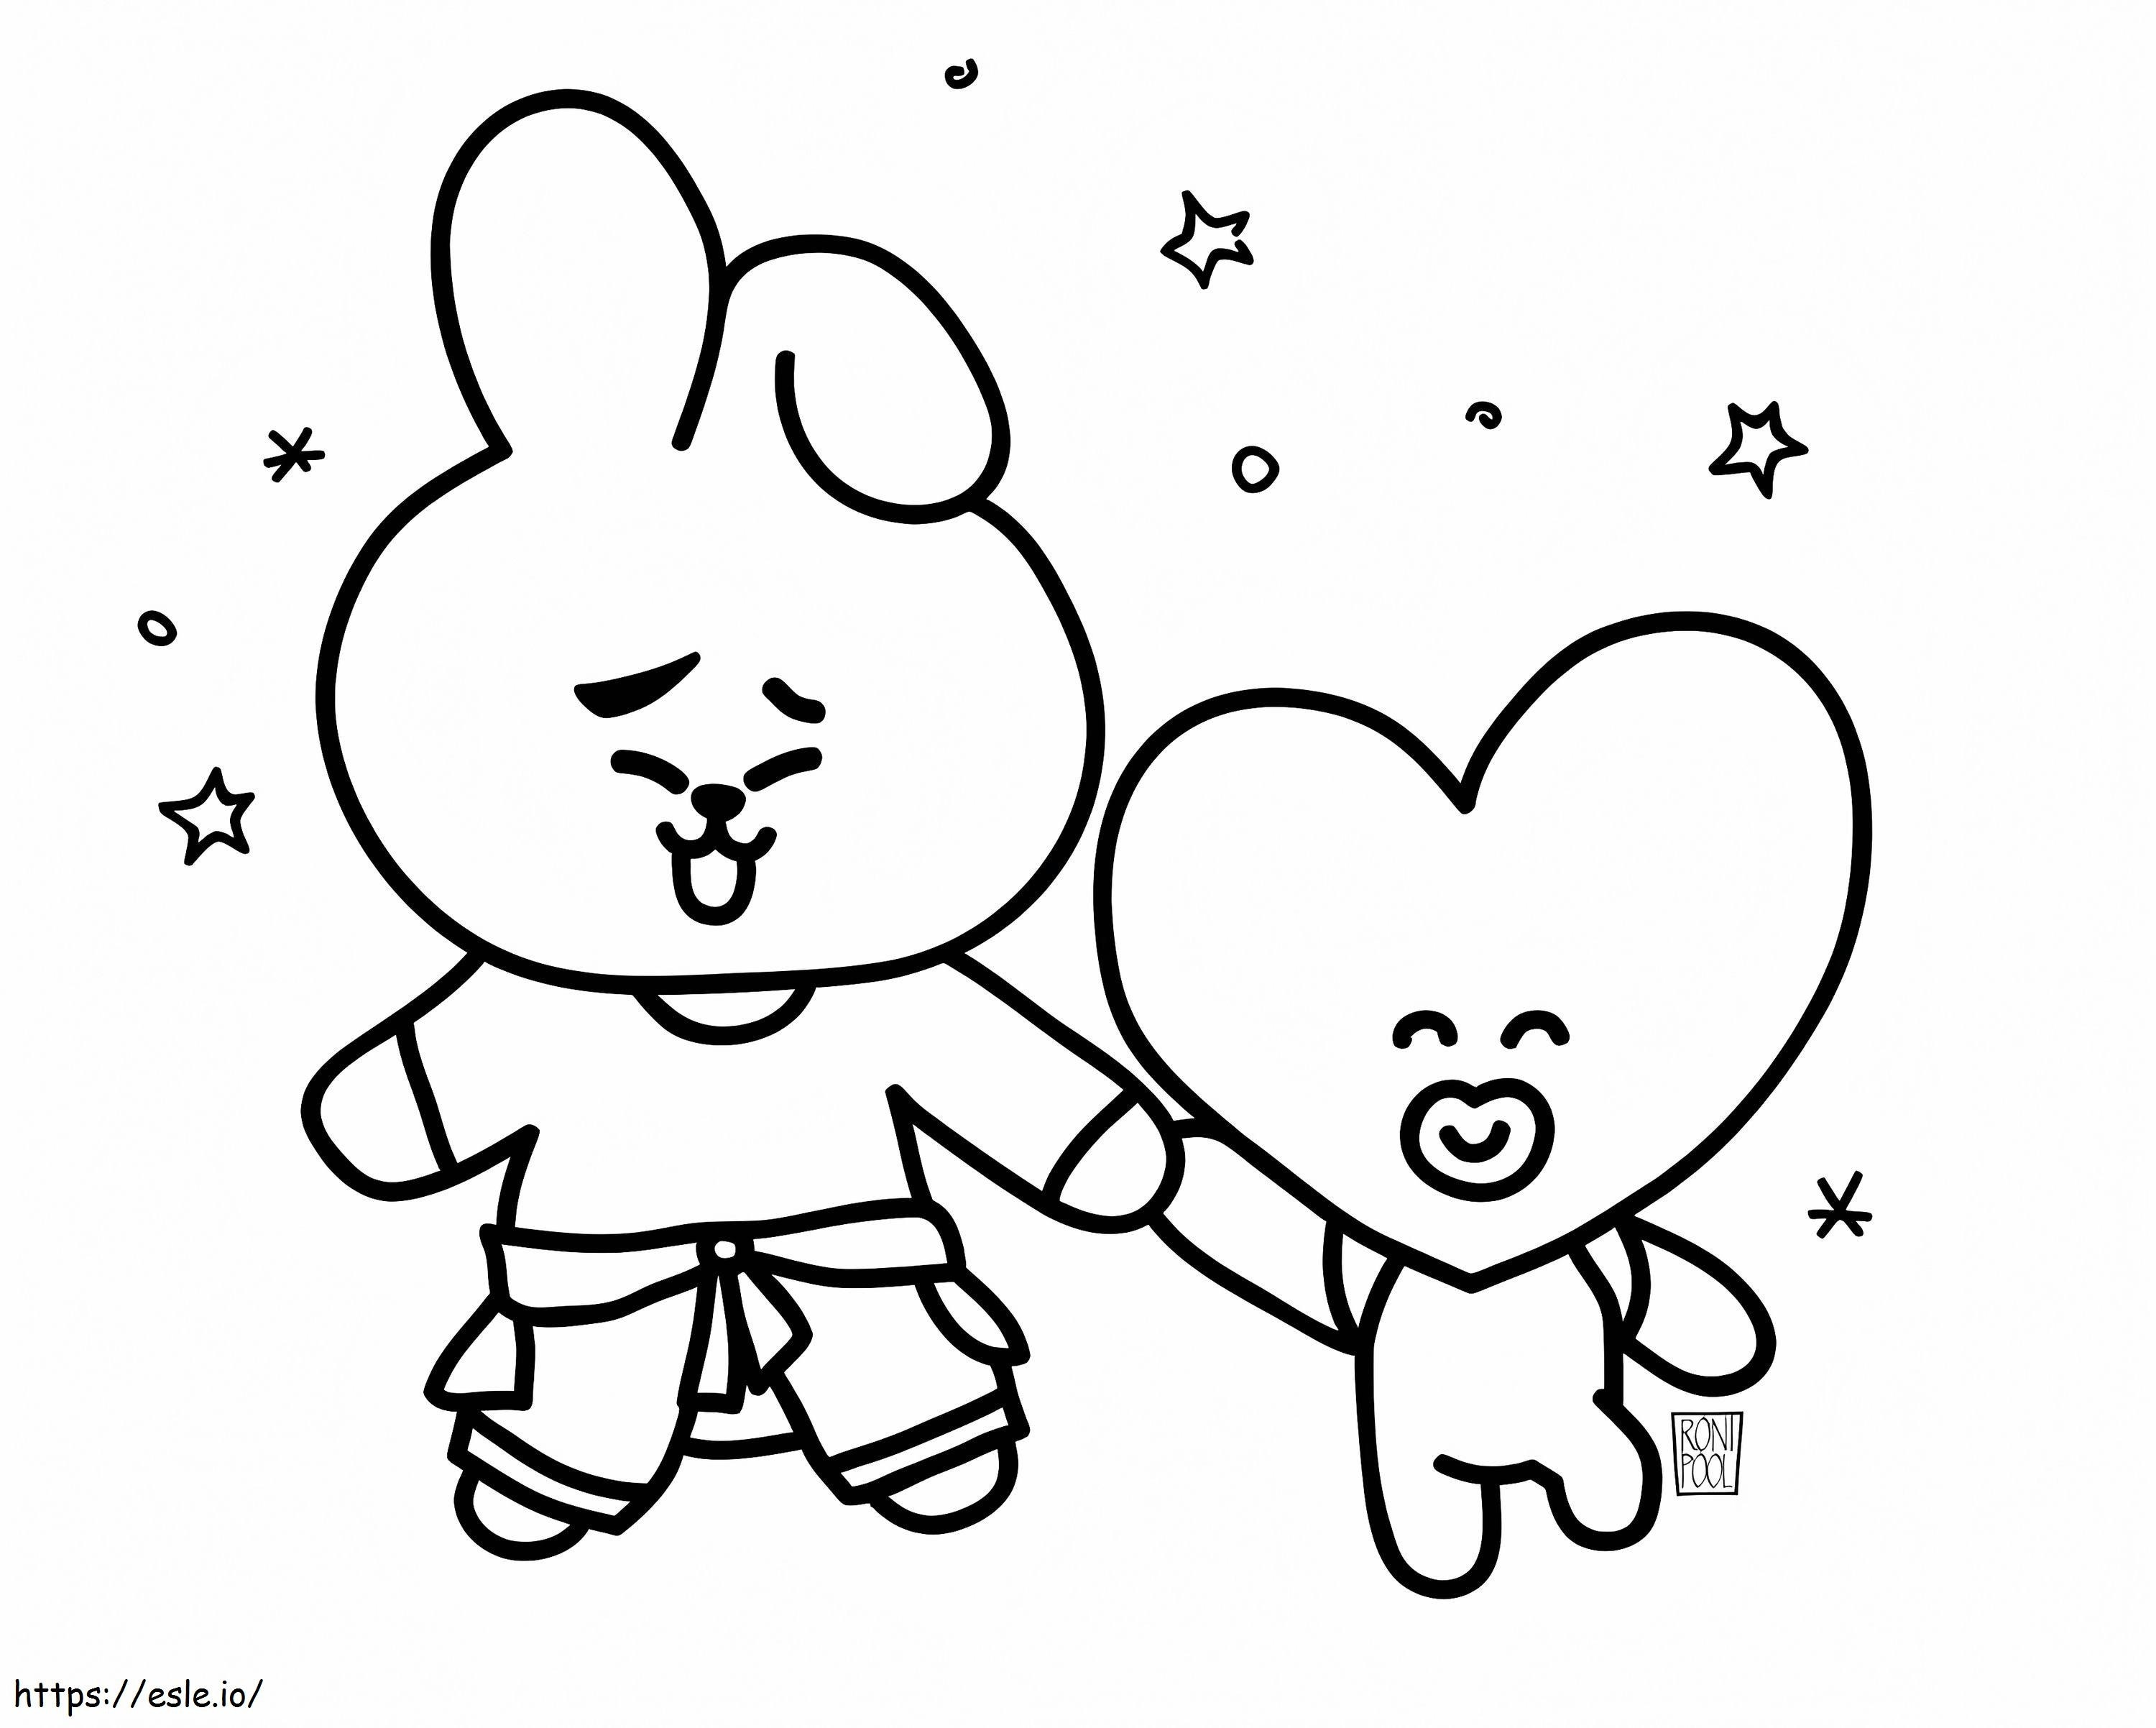 Cooky And Tata BT21 coloring page